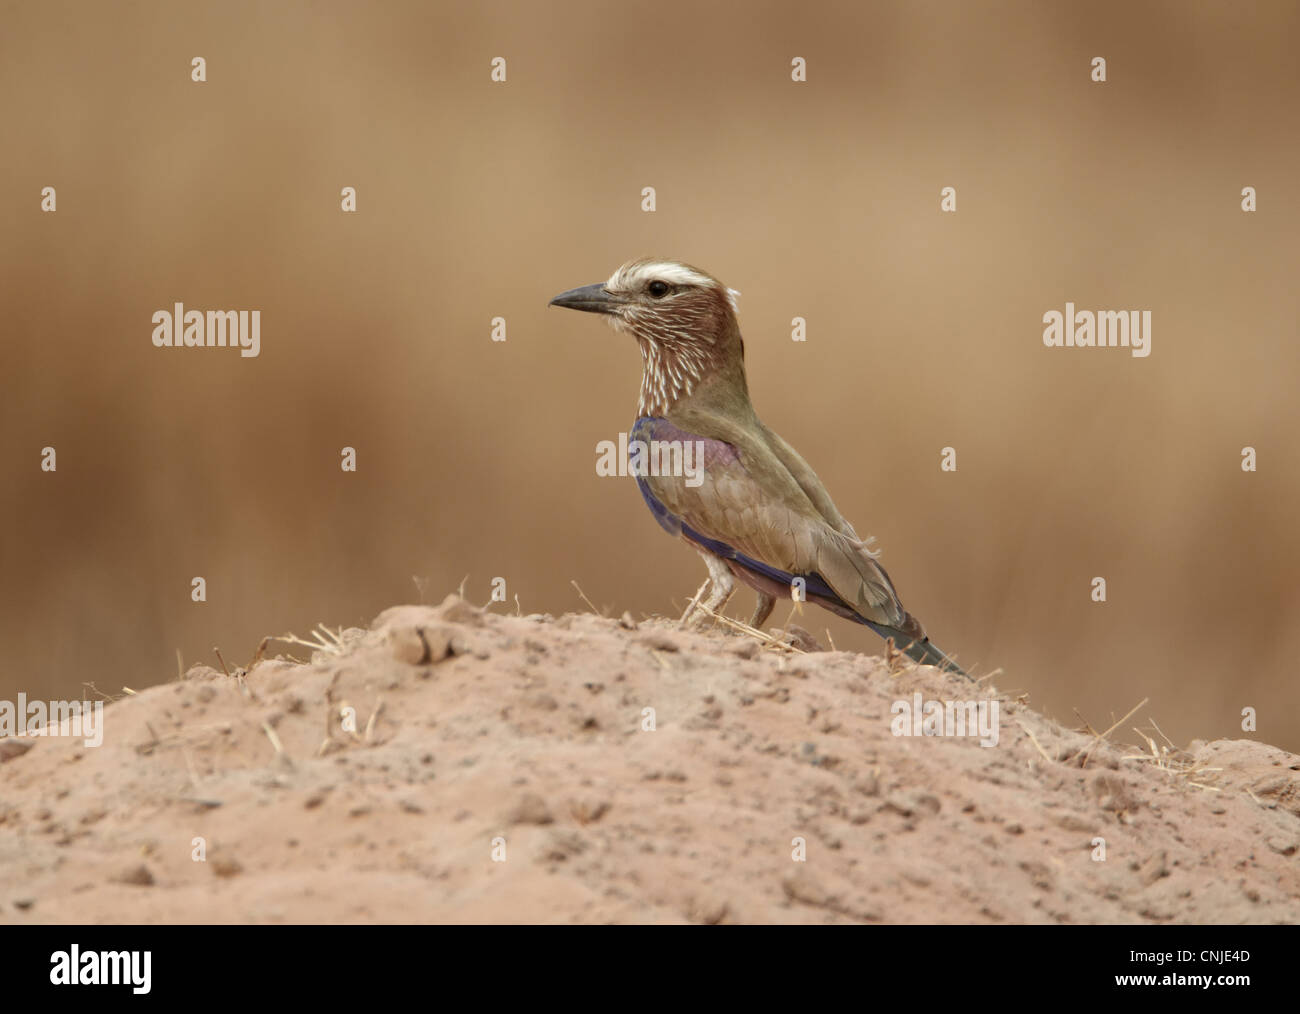 Rufous-crowned Roller (Coracias naevia) adult, standing on sandy ground, near Toubacouta, Senegal, january Stock Photo